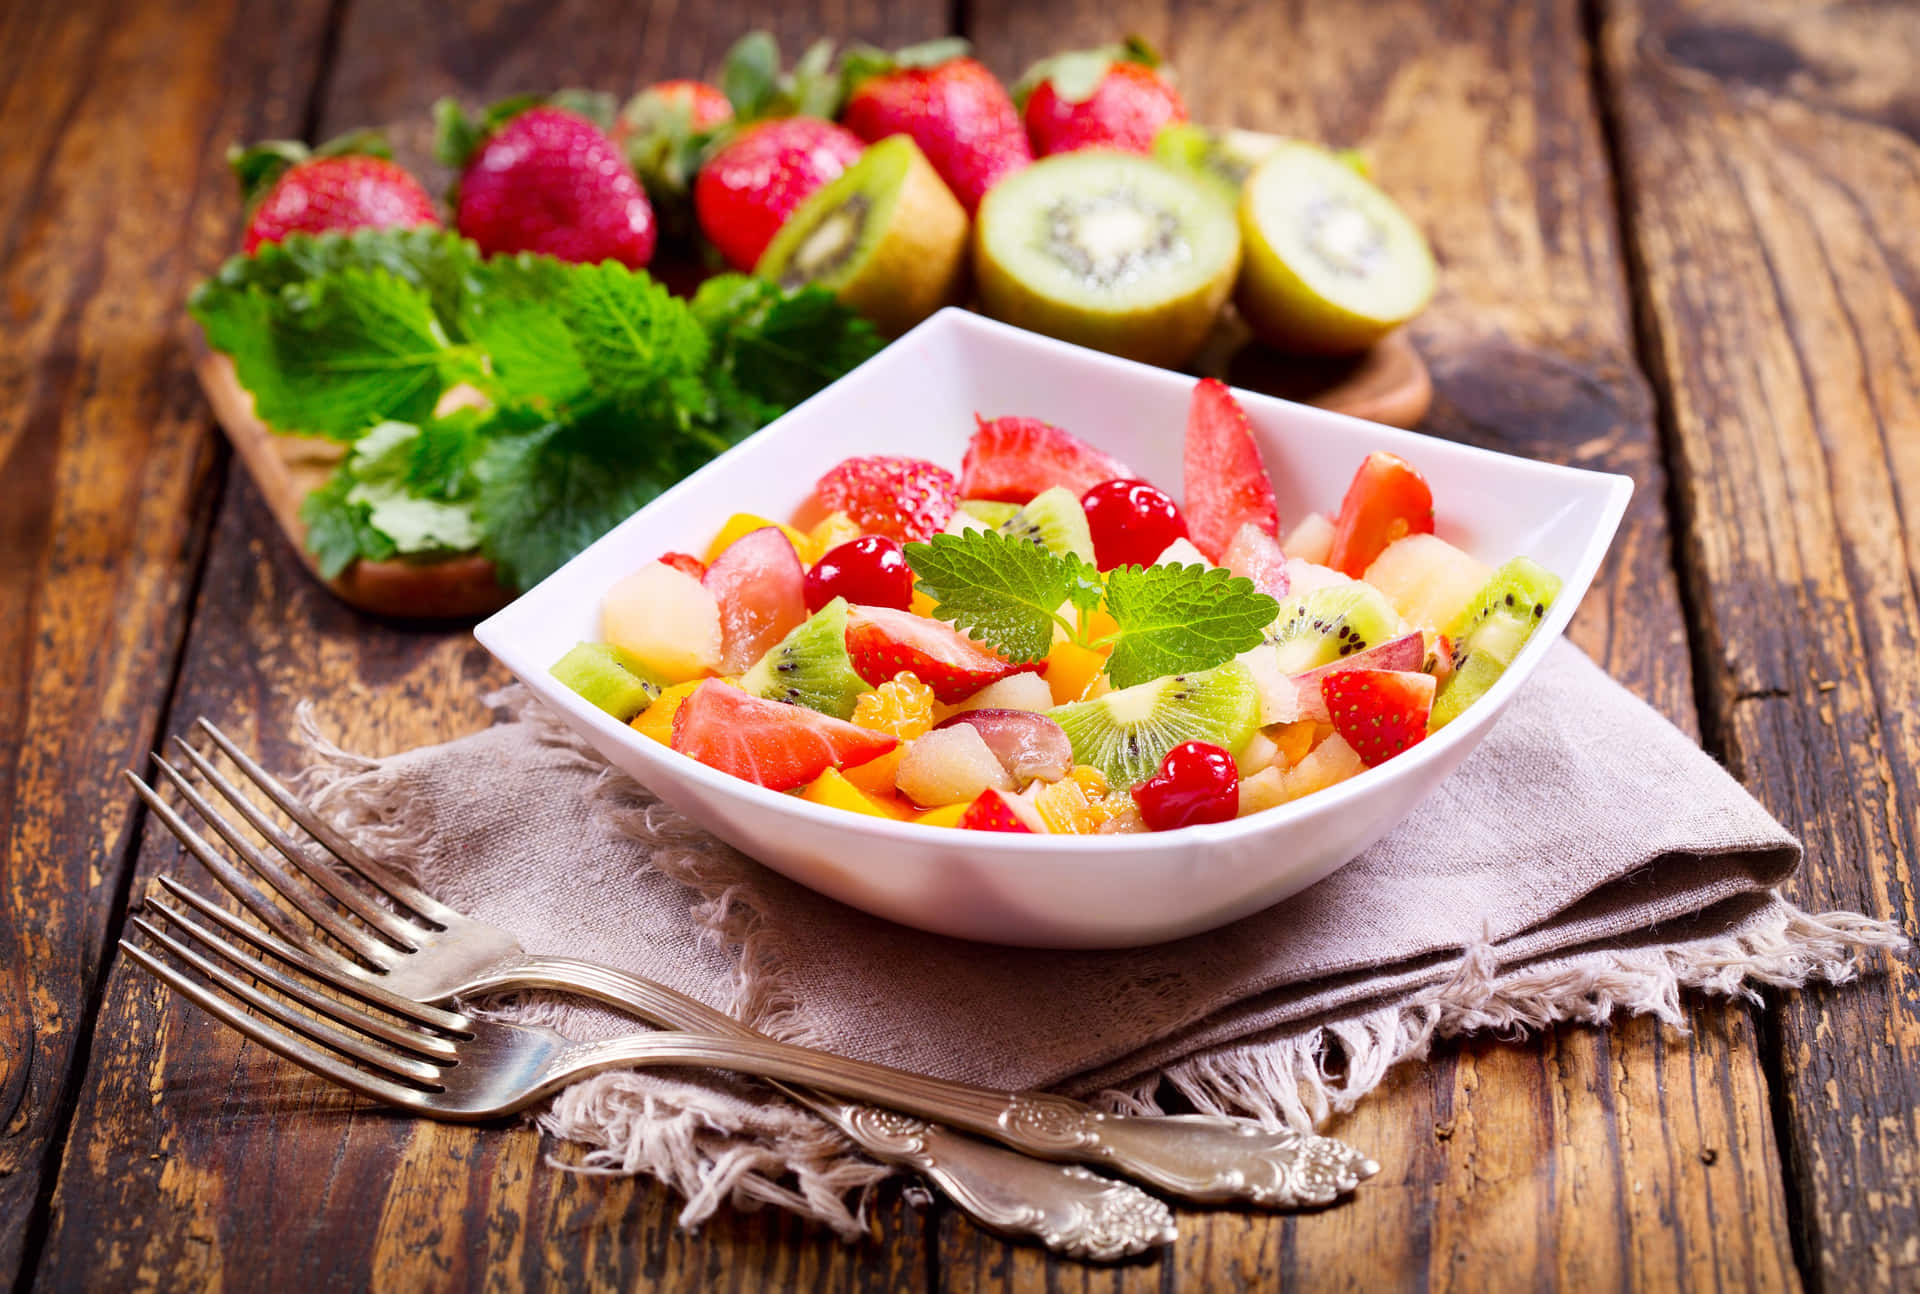 A colorful salad, freshly prepared and ready to eat